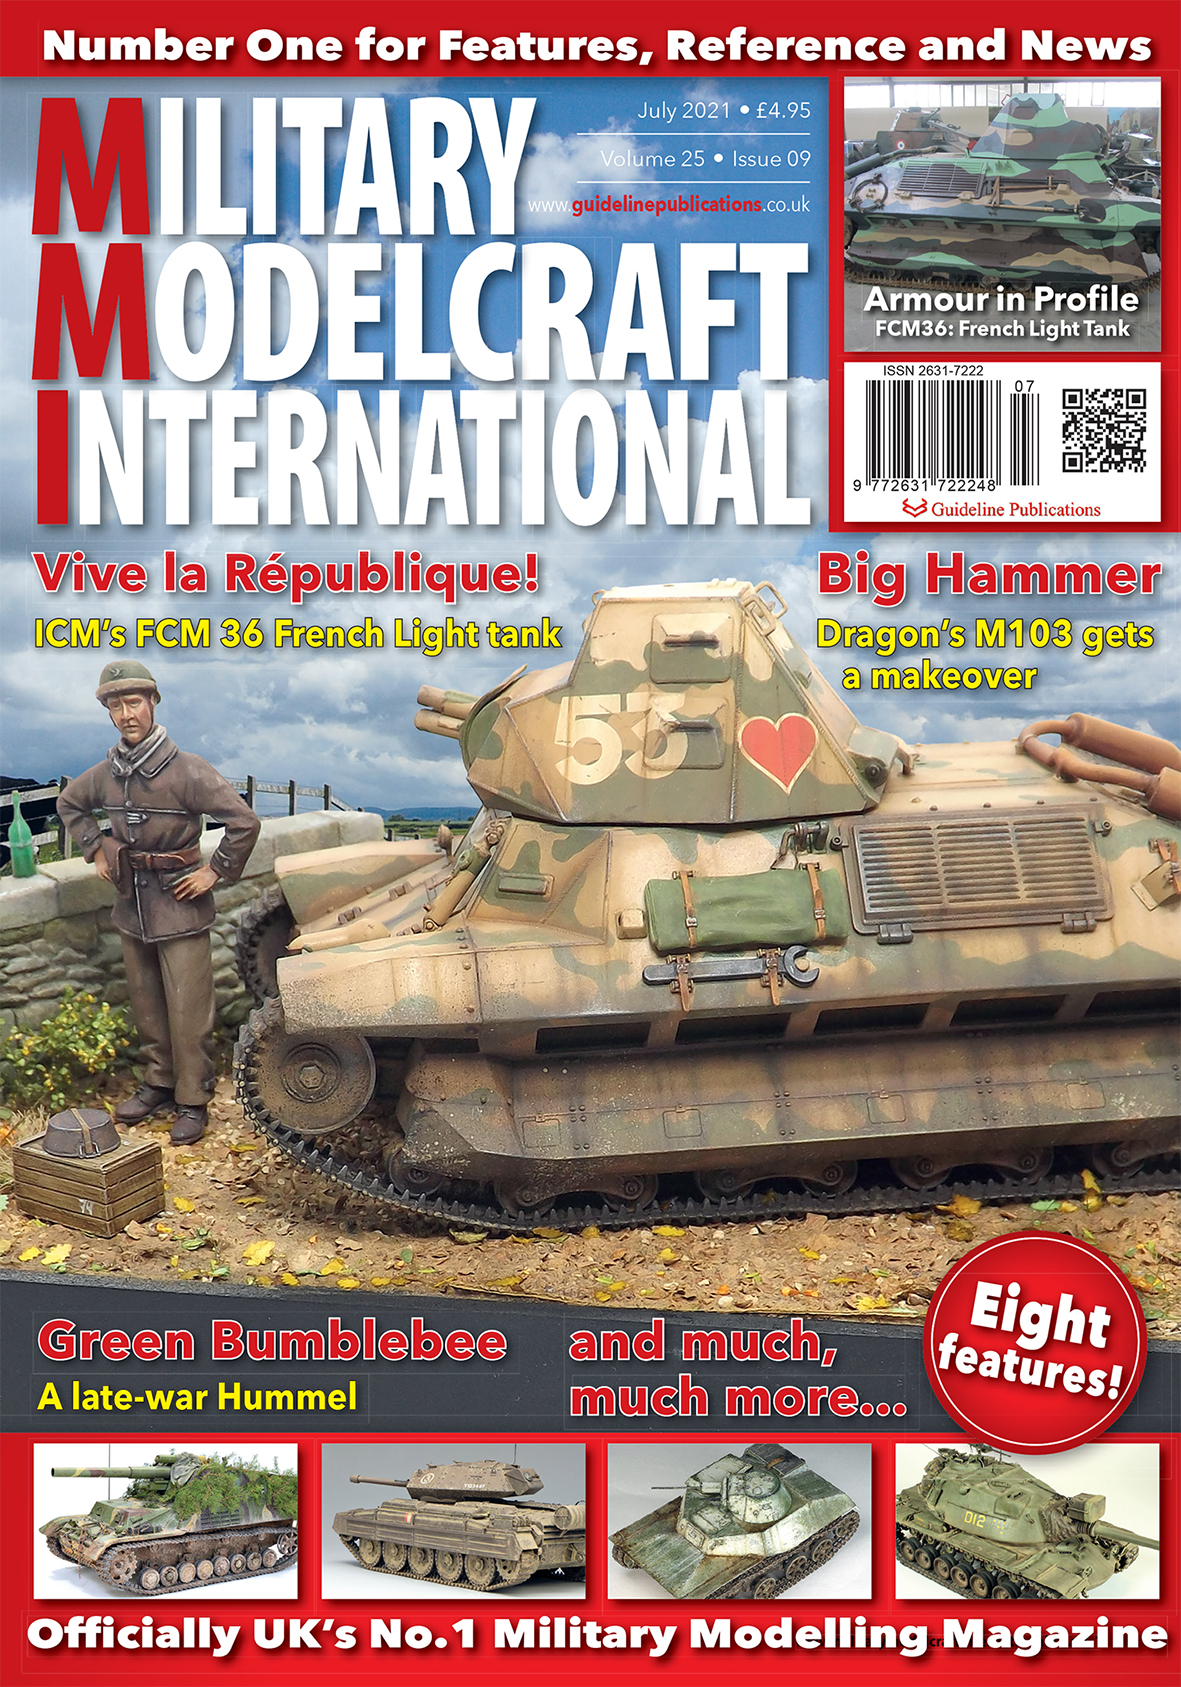 Guideline Publications Military Modelcraft Int July 21 vol 25-09 July 21 